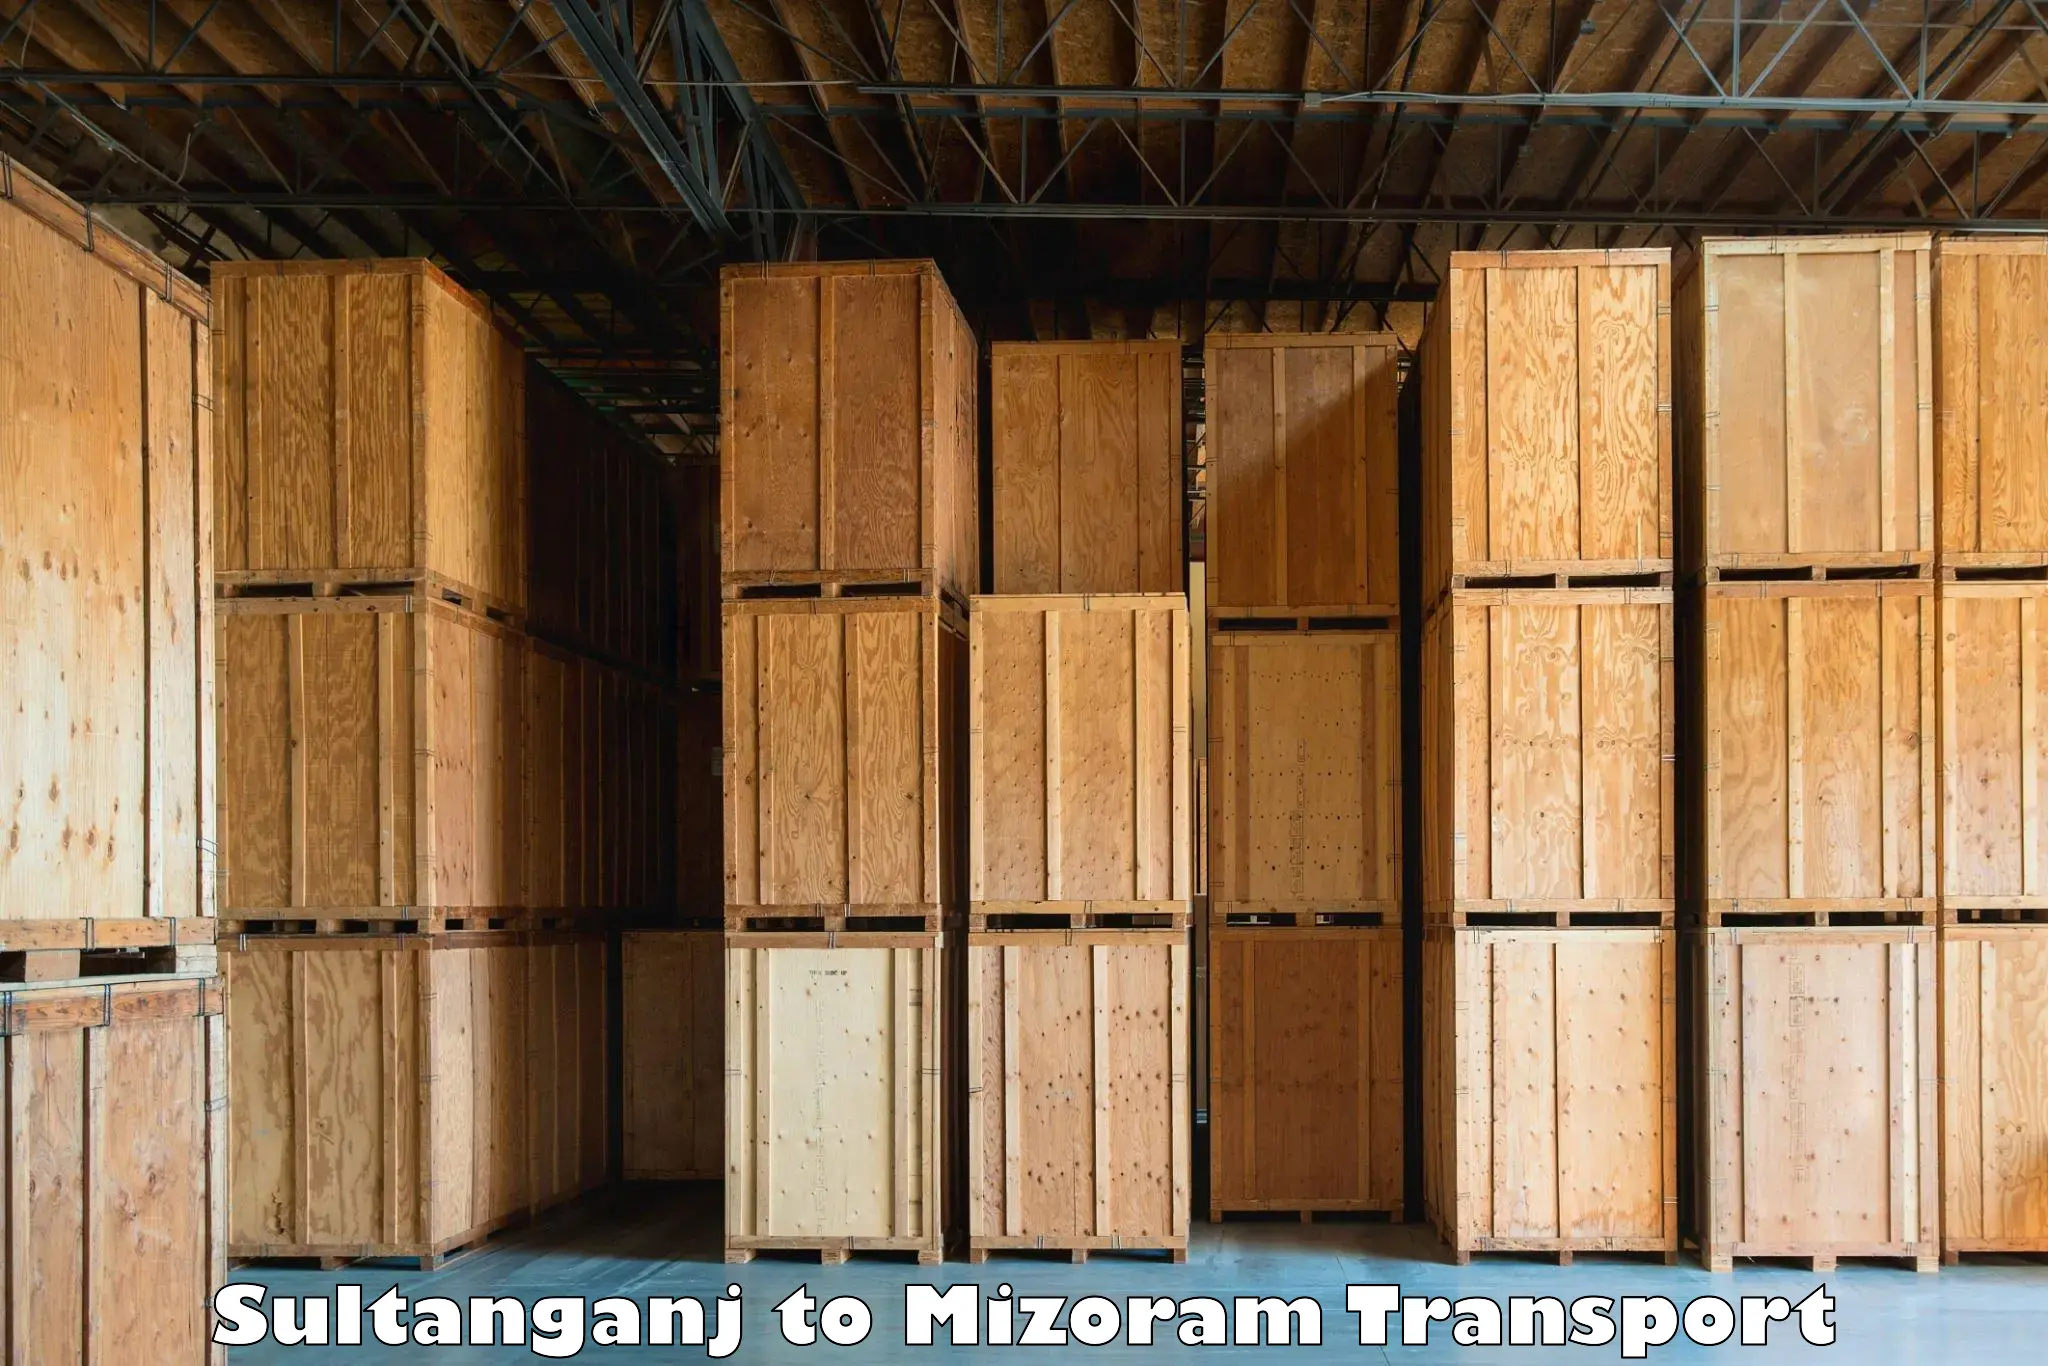 Transport bike from one state to another Sultanganj to Mizoram